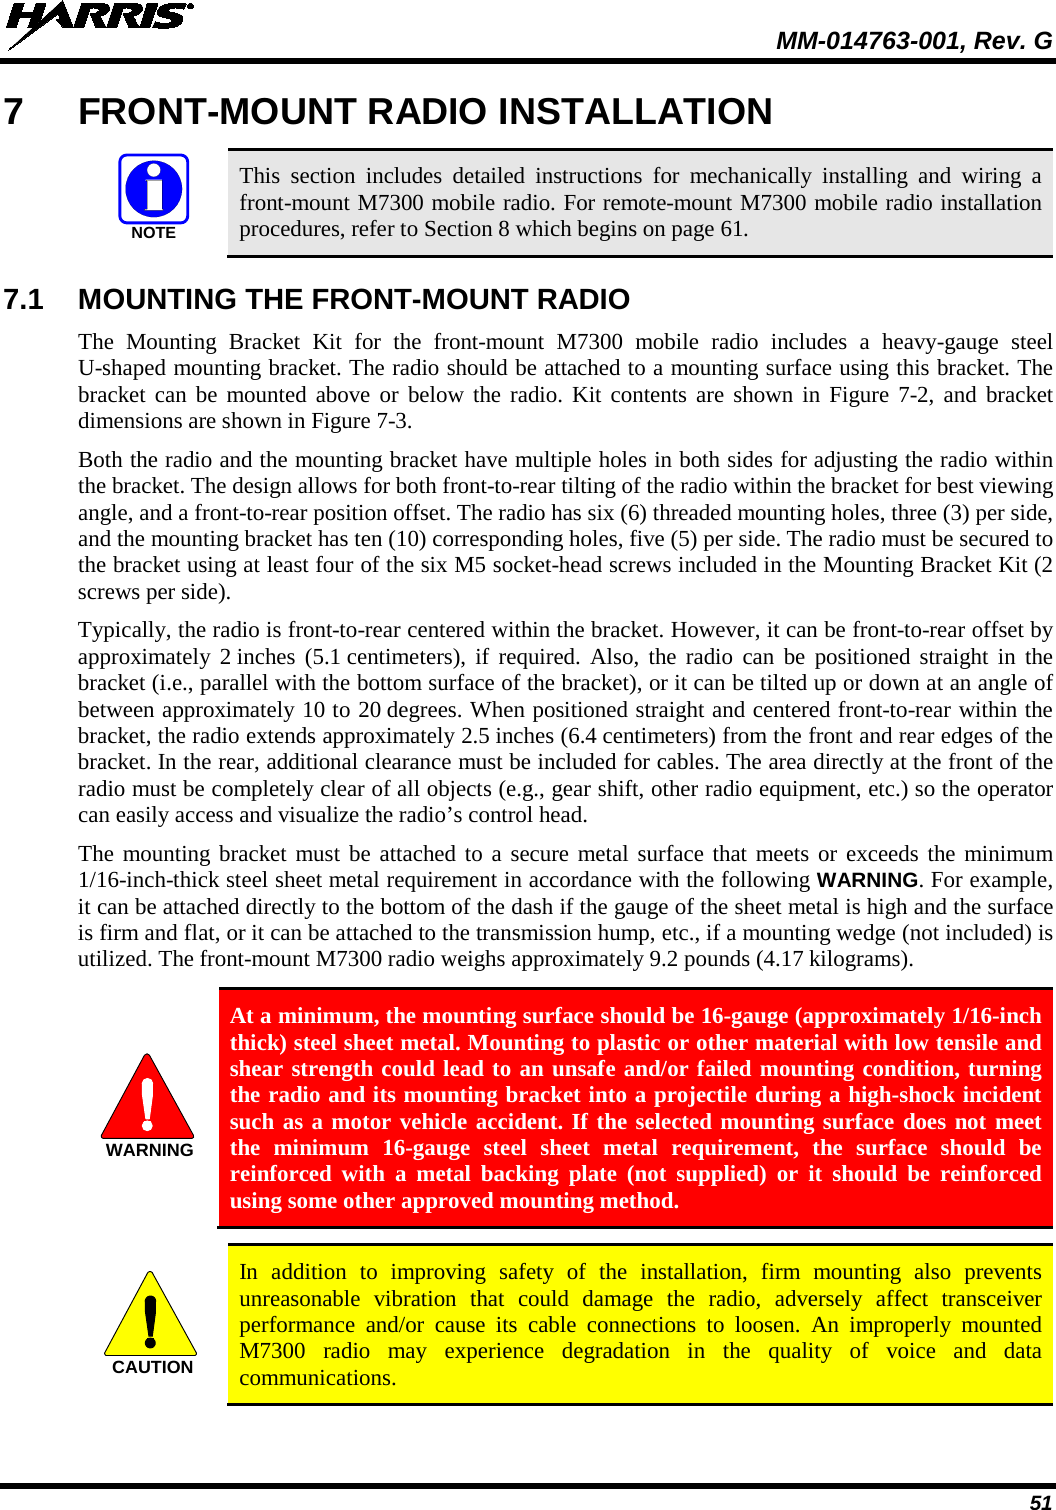  MM-014763-001, Rev. G 51 7  FRONT-MOUNT RADIO INSTALLATION   This section includes detailed instructions for mechanically installing and wiring a front-mount M7300 mobile radio. For remote-mount M7300 mobile radio installation procedures, refer to Section 8 which begins on page 61.  7.1 MOUNTING THE FRONT-MOUNT RADIO The  Mounting Bracket Kit for the front-mount  M7300  mobile radio includes a heavy-gauge steel U-shaped mounting bracket. The radio should be attached to a mounting surface using this bracket. The bracket can be mounted above or below the radio. Kit contents are shown in Figure  7-2, and bracket dimensions are shown in Figure 7-3. Both the radio and the mounting bracket have multiple holes in both sides for adjusting the radio within the bracket. The design allows for both front-to-rear tilting of the radio within the bracket for best viewing angle, and a front-to-rear position offset. The radio has six (6) threaded mounting holes, three (3) per side, and the mounting bracket has ten (10) corresponding holes, five (5) per side. The radio must be secured to the bracket using at least four of the six M5 socket-head screws included in the Mounting Bracket Kit (2 screws per side). Typically, the radio is front-to-rear centered within the bracket. However, it can be front-to-rear offset by approximately 2 inches (5.1 centimeters), if required. Also, the radio can be positioned straight  in the bracket (i.e., parallel with the bottom surface of the bracket), or it can be tilted up or down at an angle of between approximately 10 to 20 degrees. When positioned straight and centered front-to-rear within the bracket, the radio extends approximately 2.5 inches (6.4 centimeters) from the front and rear edges of the bracket. In the rear, additional clearance must be included for cables. The area directly at the front of the radio must be completely clear of all objects (e.g., gear shift, other radio equipment, etc.) so the operator can easily access and visualize the radio’s control head. The mounting bracket must be attached to a secure metal surface that meets or exceeds the minimum 1/16-inch-thick steel sheet metal requirement in accordance with the following WARNING. For example, it can be attached directly to the bottom of the dash if the gauge of the sheet metal is high and the surface is firm and flat, or it can be attached to the transmission hump, etc., if a mounting wedge (not included) is utilized. The front-mount M7300 radio weighs approximately 9.2 pounds (4.17 kilograms).   At a minimum, the mounting surface should be 16-gauge (approximately 1/16-inch thick) steel sheet metal. Mounting to plastic or other material with low tensile and shear strength could lead to an unsafe and/or failed mounting condition, turning the radio and its mounting bracket into a projectile during a high-shock incident such as a motor vehicle accident. If the selected mounting surface does not meet the minimum 16-gauge steel sheet metal requirement, the surface should be reinforced with a metal backing plate (not supplied) or it should be reinforced using some other approved mounting method.   In addition to improving safety of the installation, firm mounting also prevents unreasonable vibration that could damage the radio, adversely affect transceiver performance and/or cause its cable connections to loosen. An improperly mounted M7300 radio may experience degradation in the quality of voice and data communications.  NOTEWARNINGCAUTION